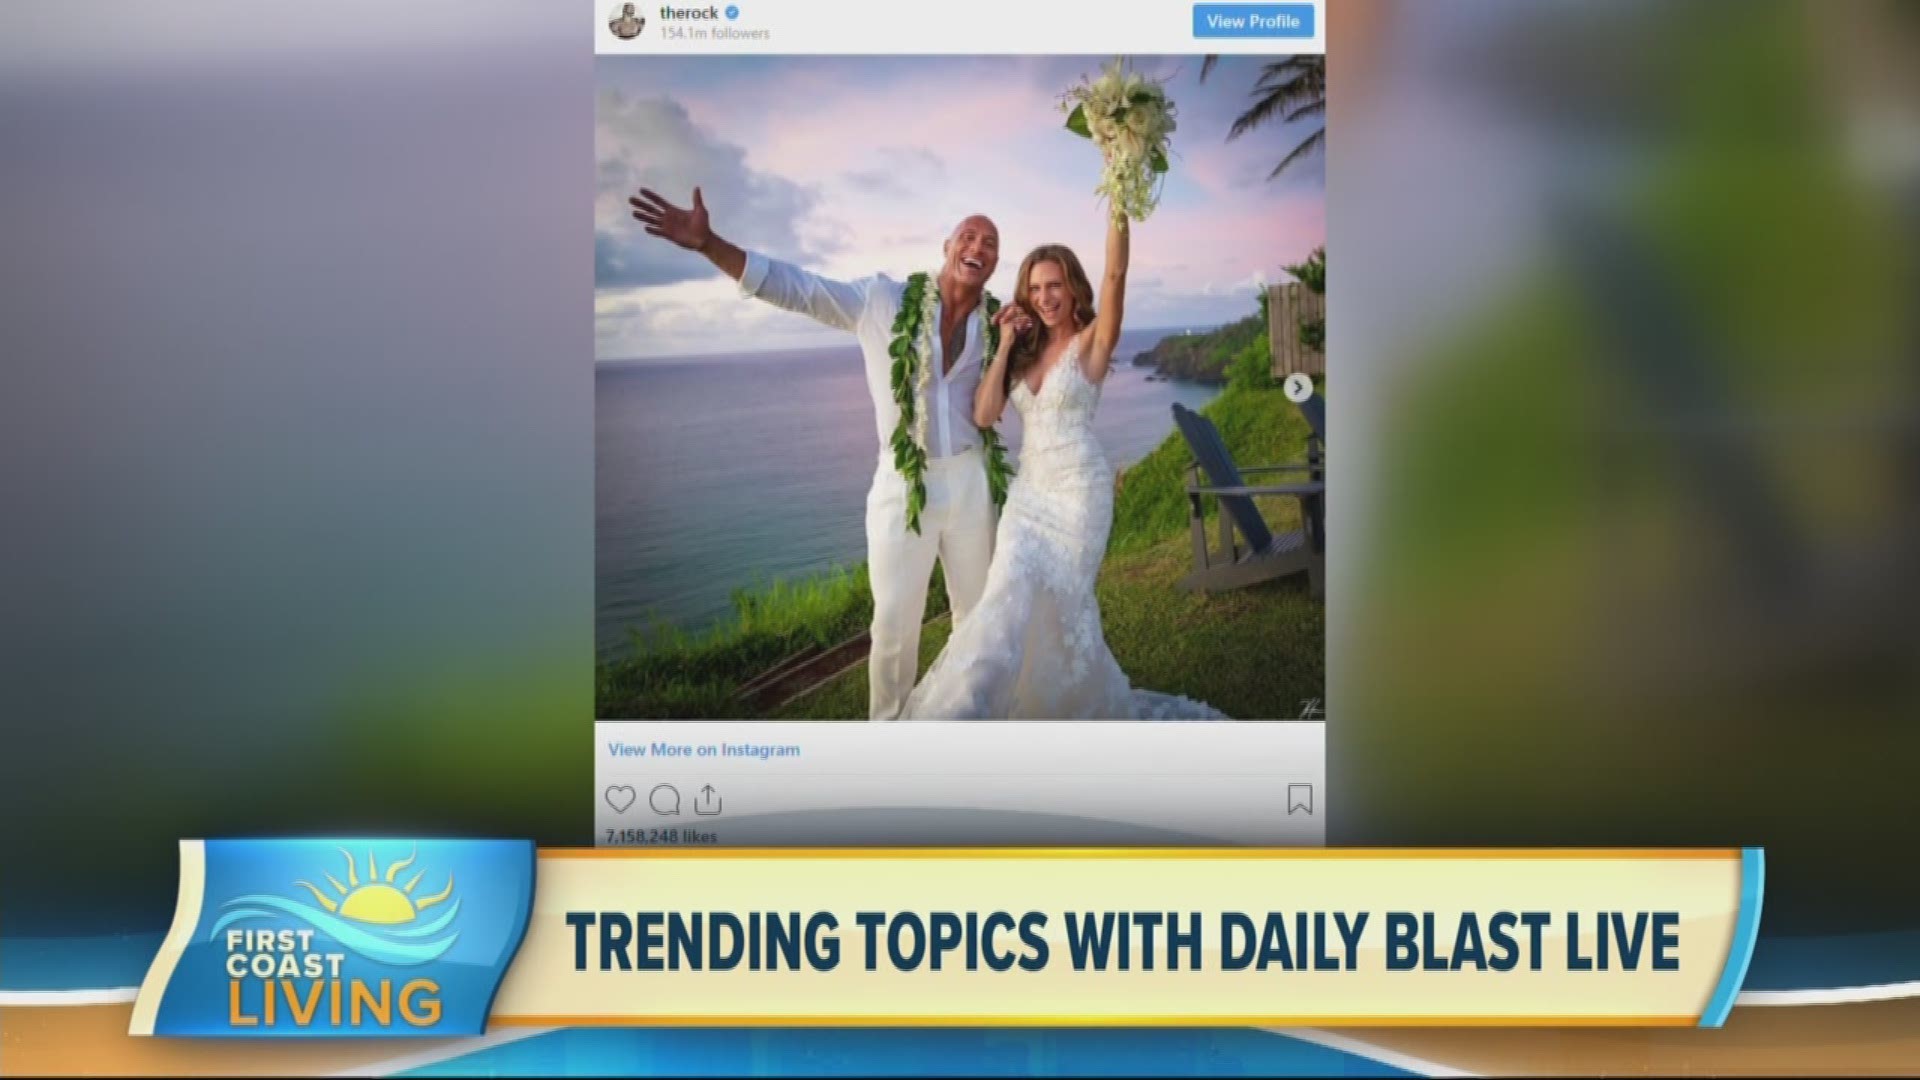 It's never a dull conversation when Daily Blast Live talks trending topics!